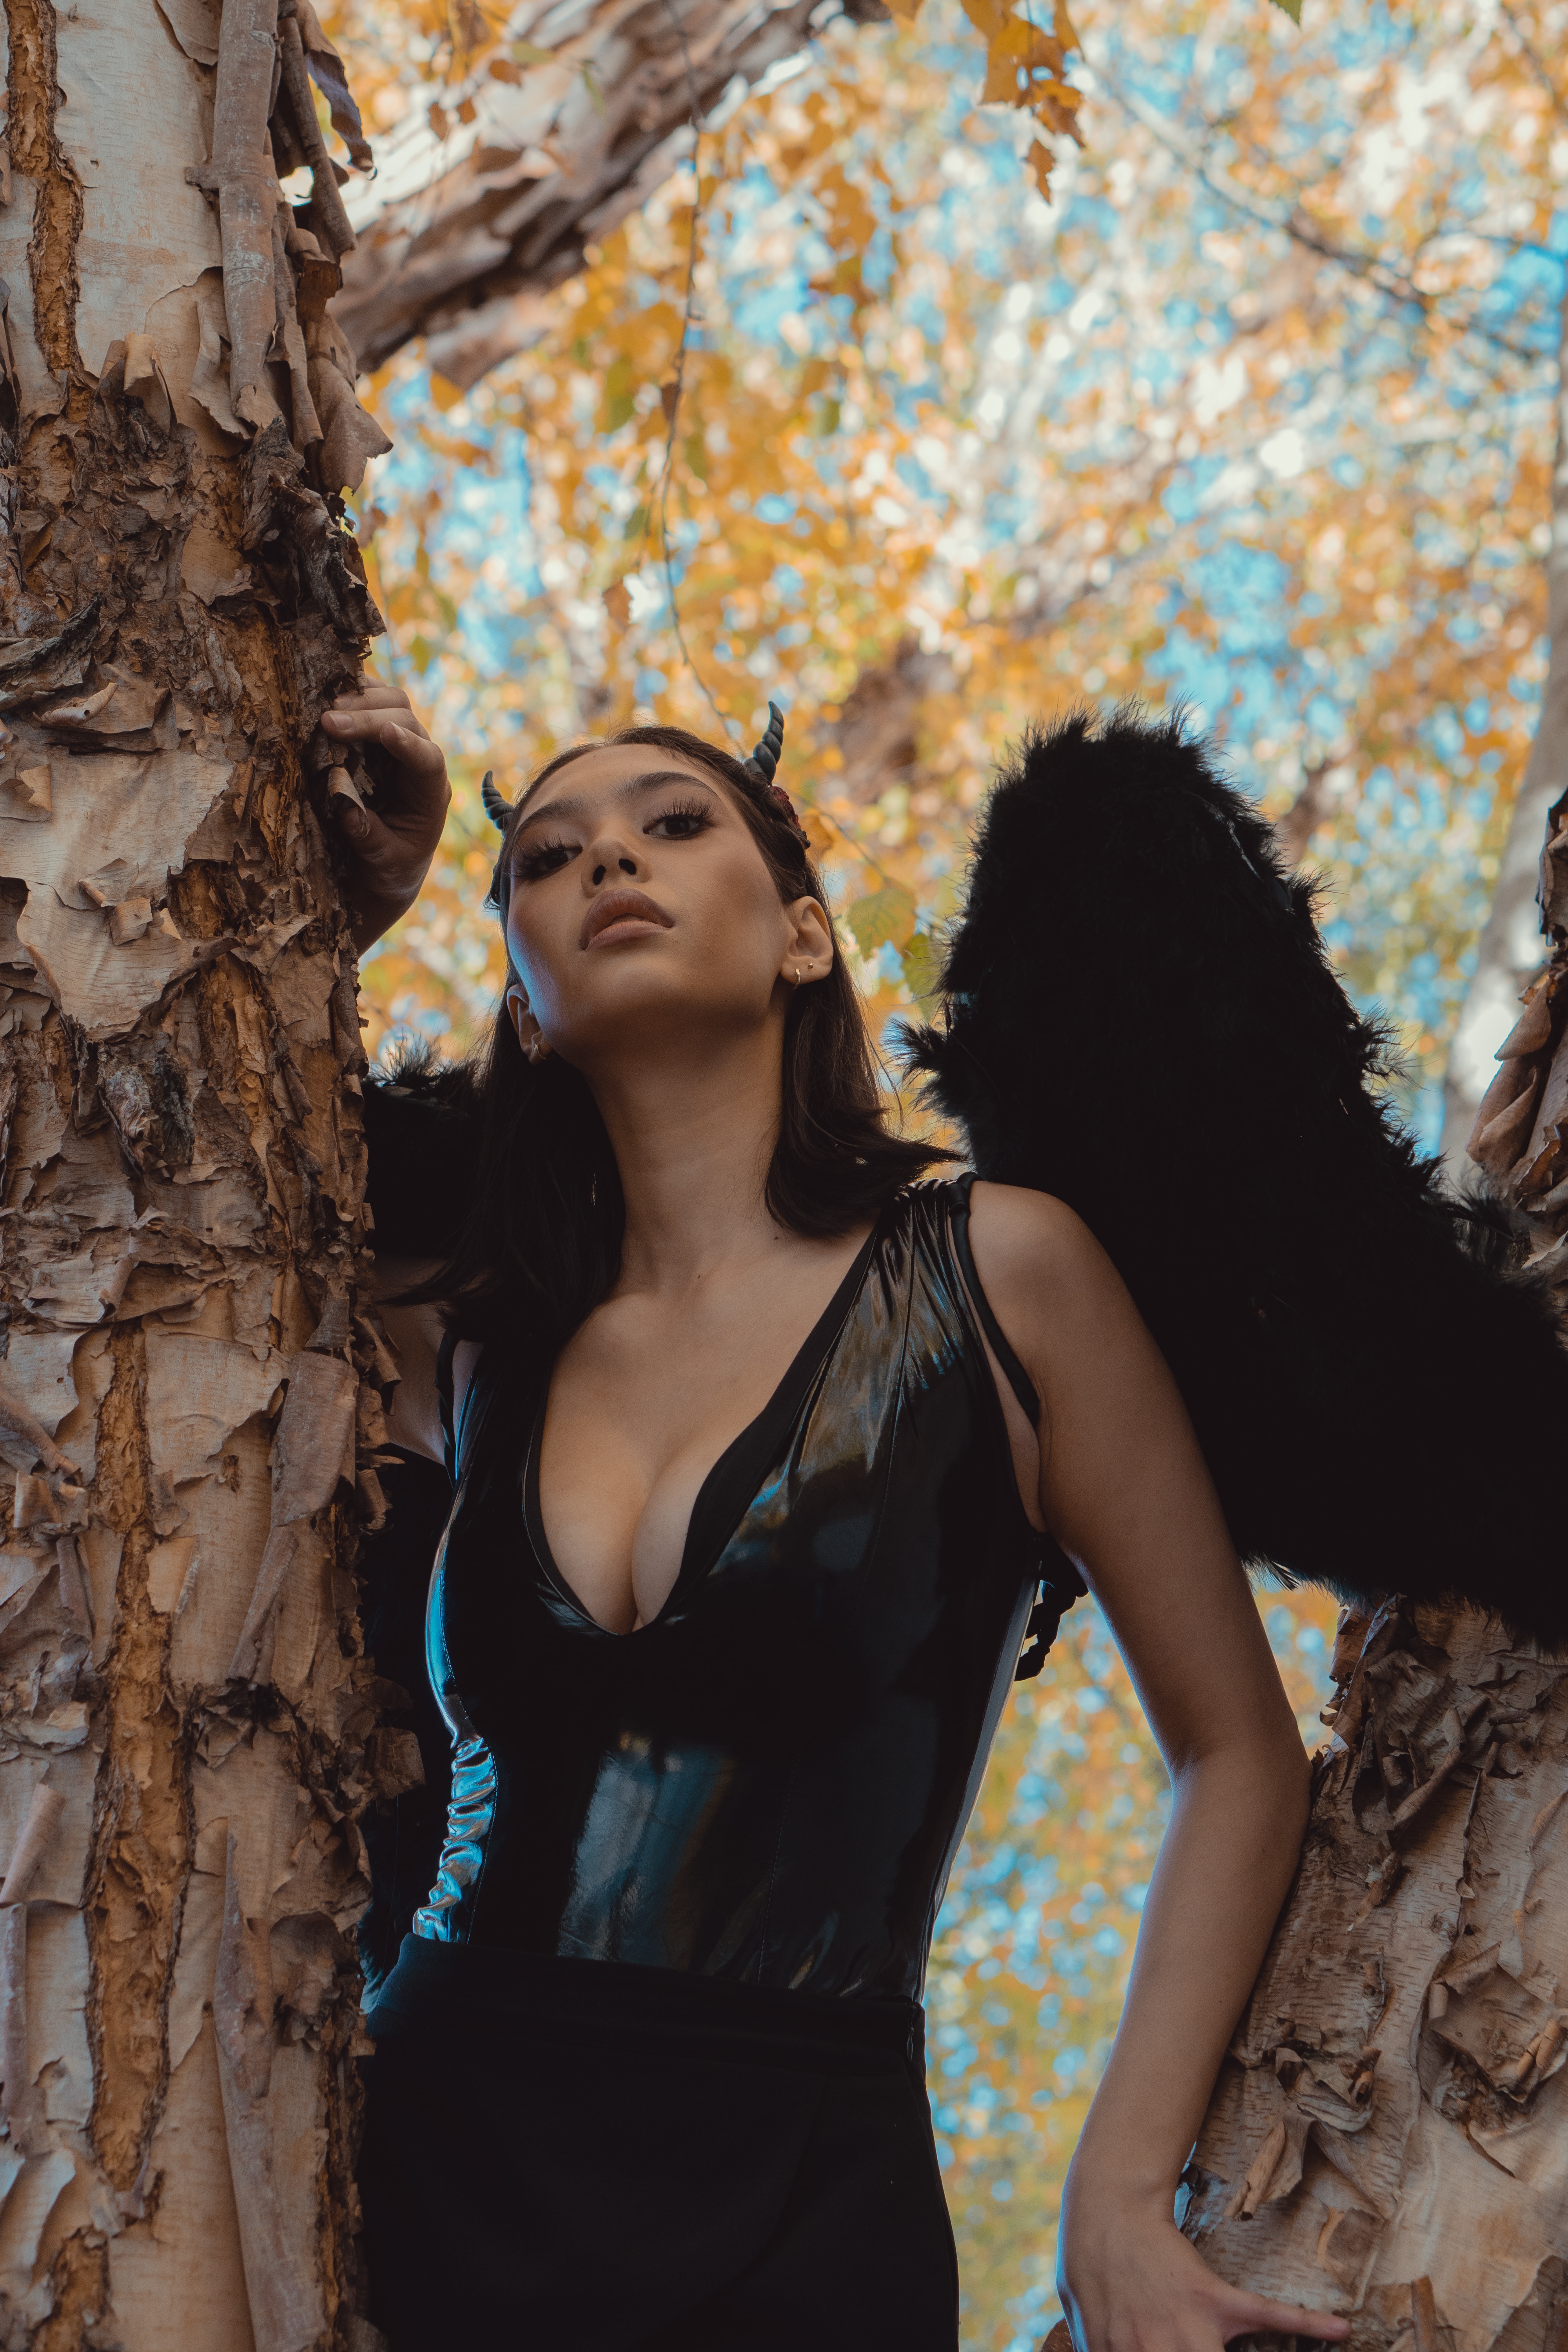 A woman dressed in a black angel outfit. | Source: Pexels